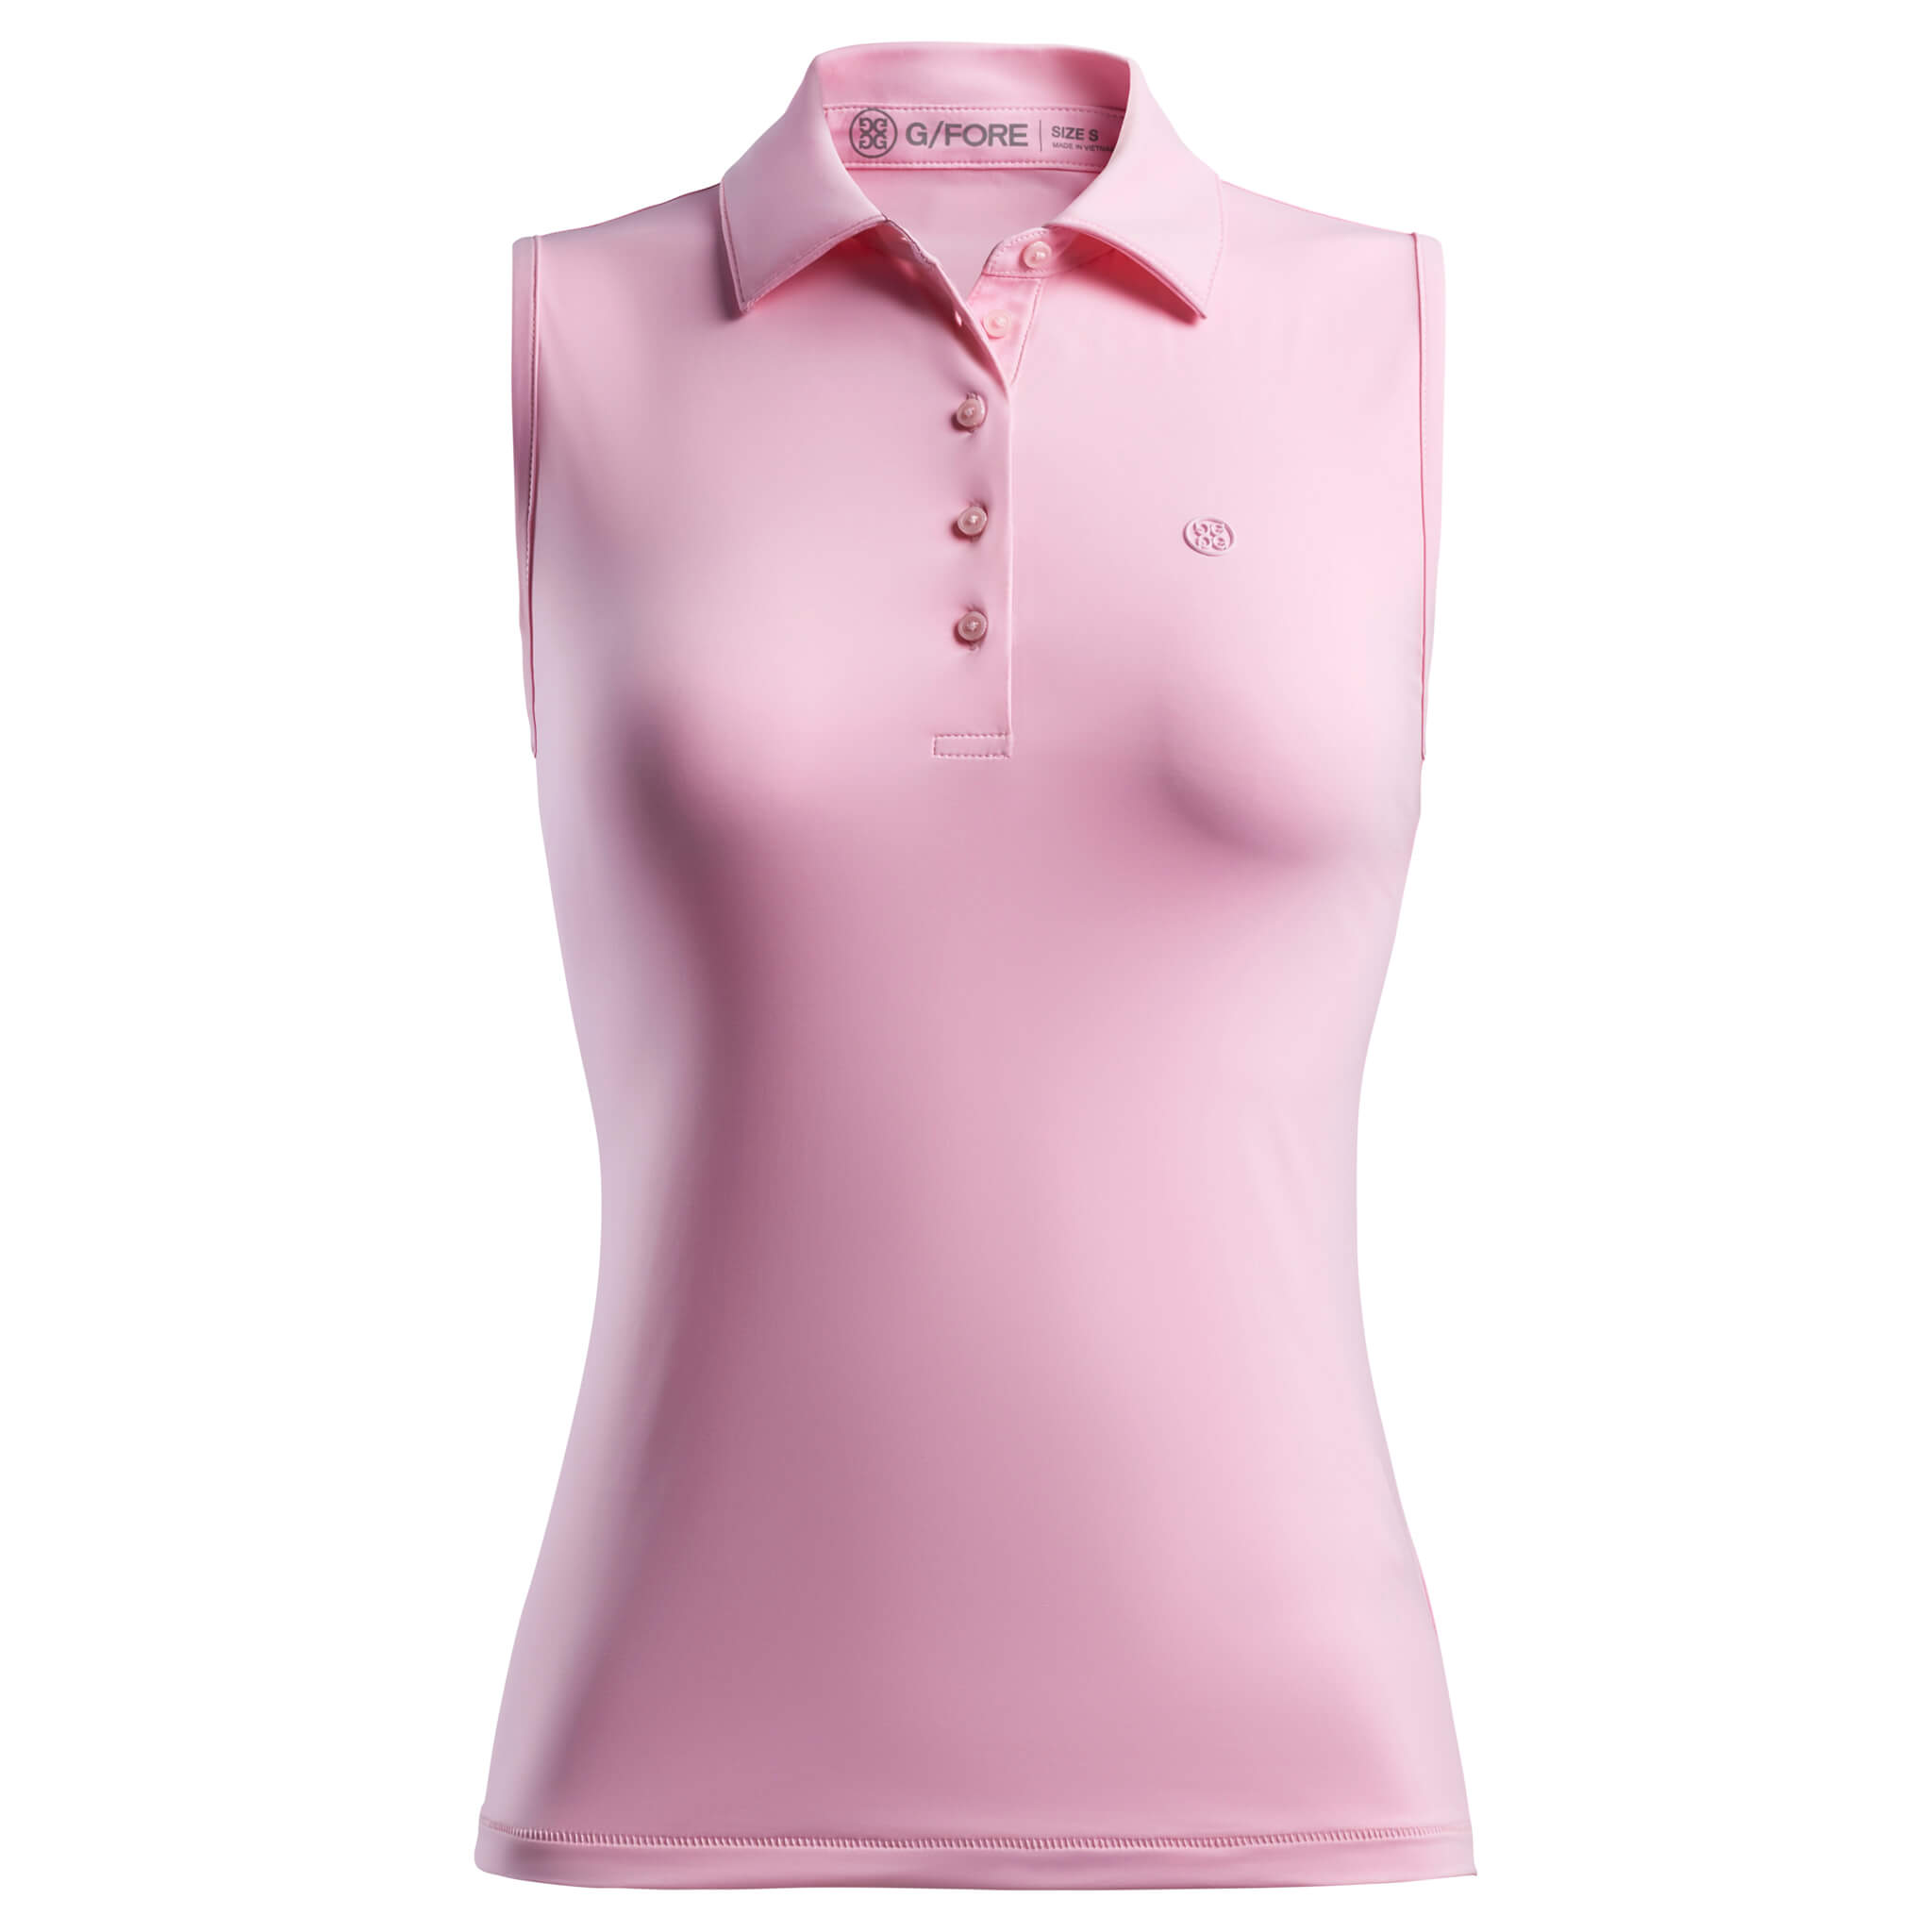 G/FORE Featherweight Sleeveless Ladies Golf Polo Shirt